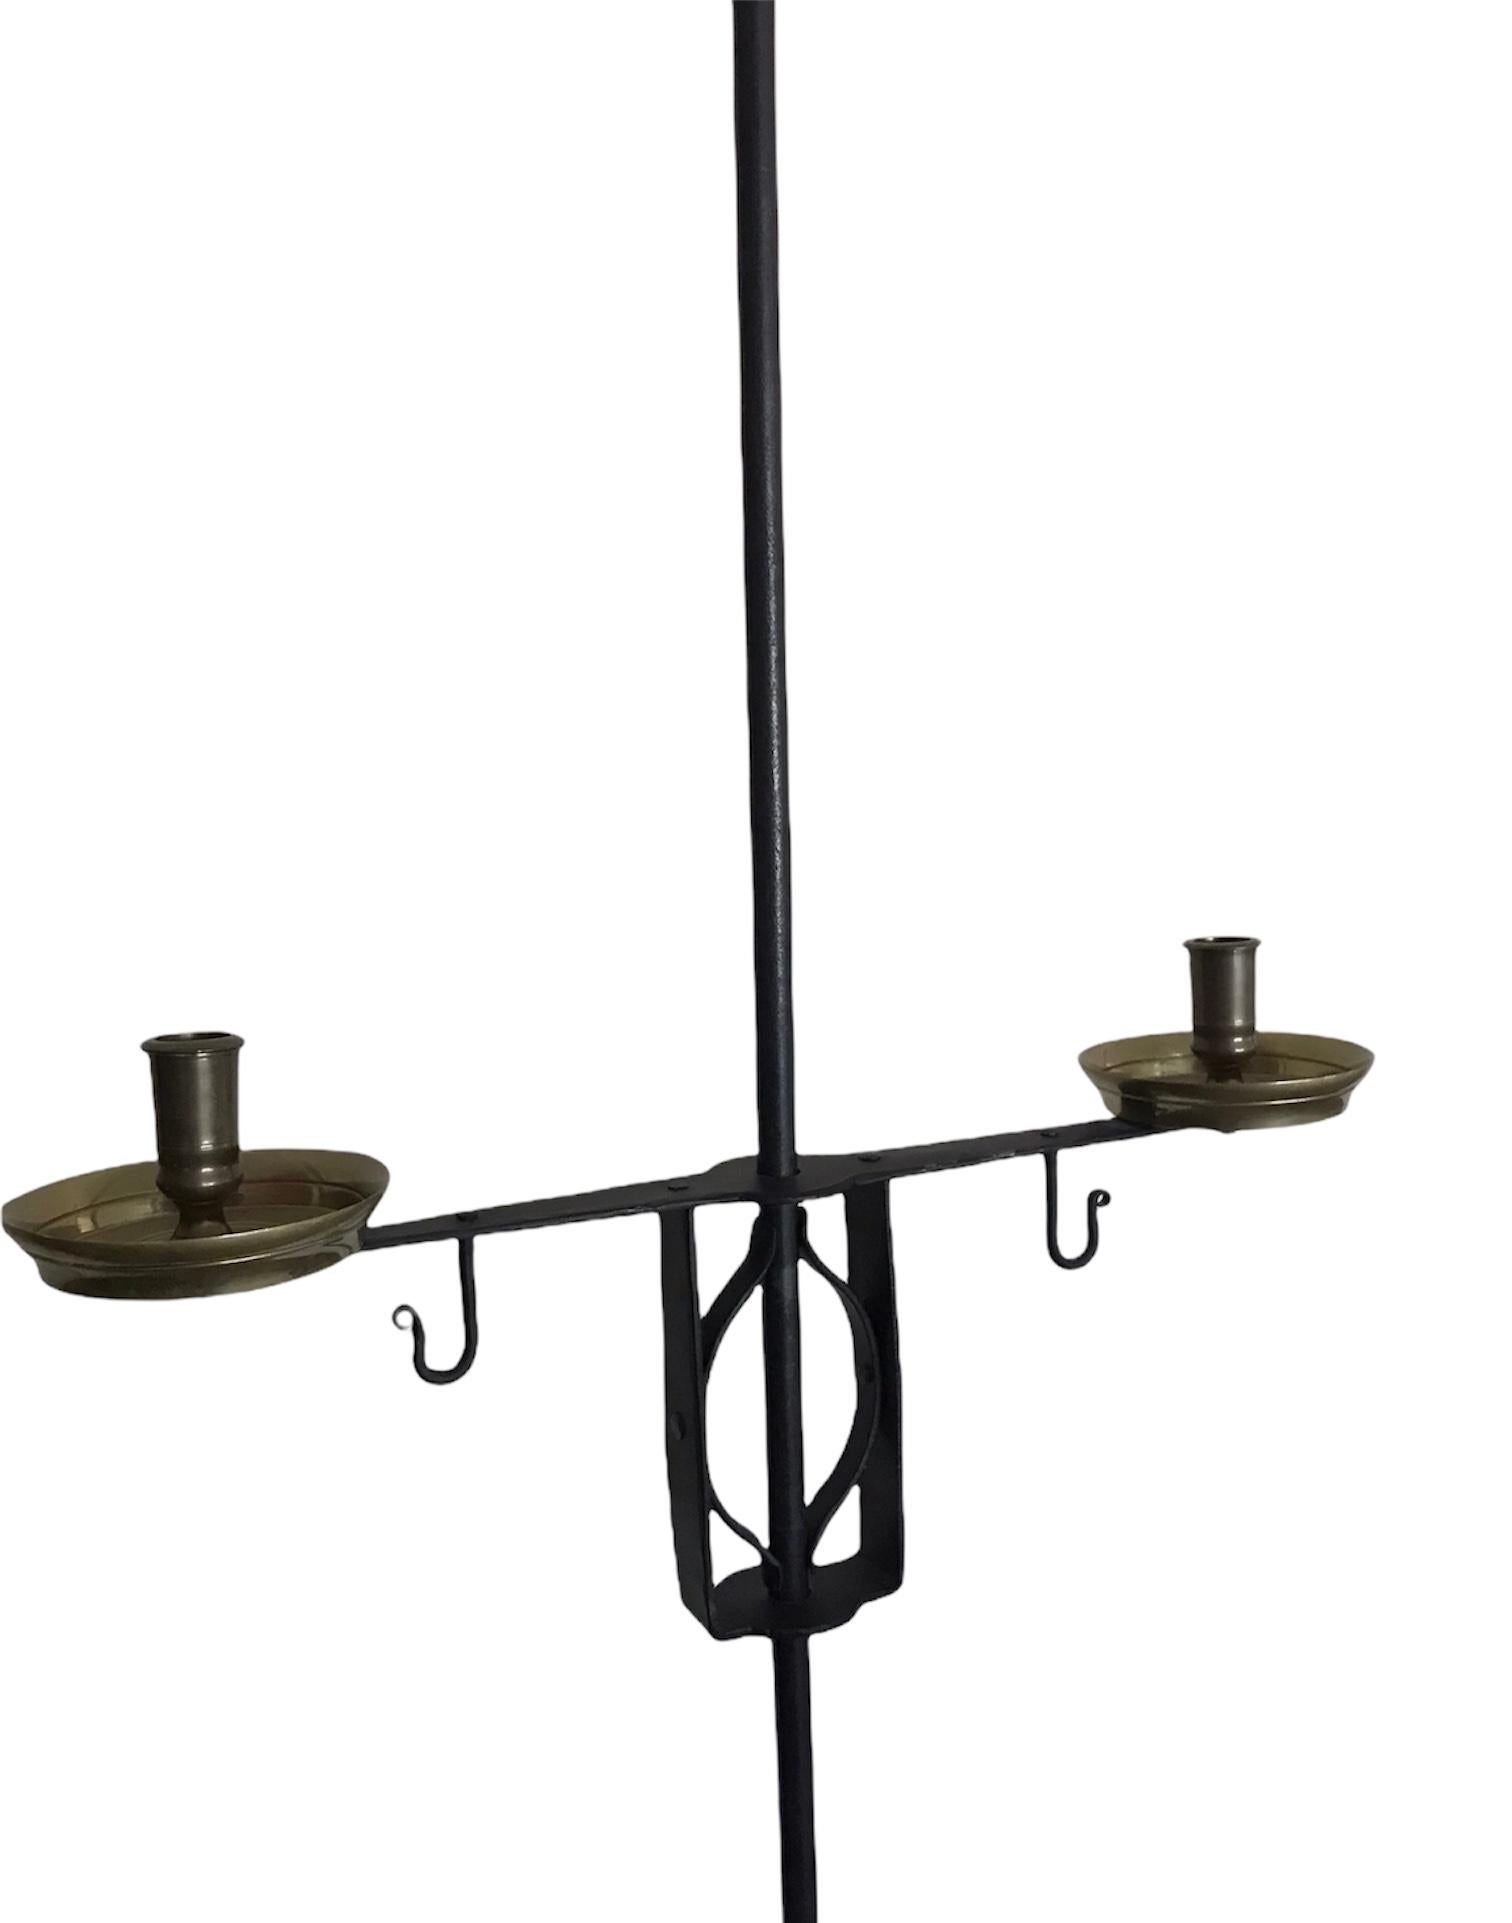 The craftsmanship of forging is remarkable on this black iron with brass accents candelabra. Tall in stature offering two brass candle holders with 3 ribbon-like iron curved legs. Mid Century Designer Tommi Parzinger was noted for his “high-style